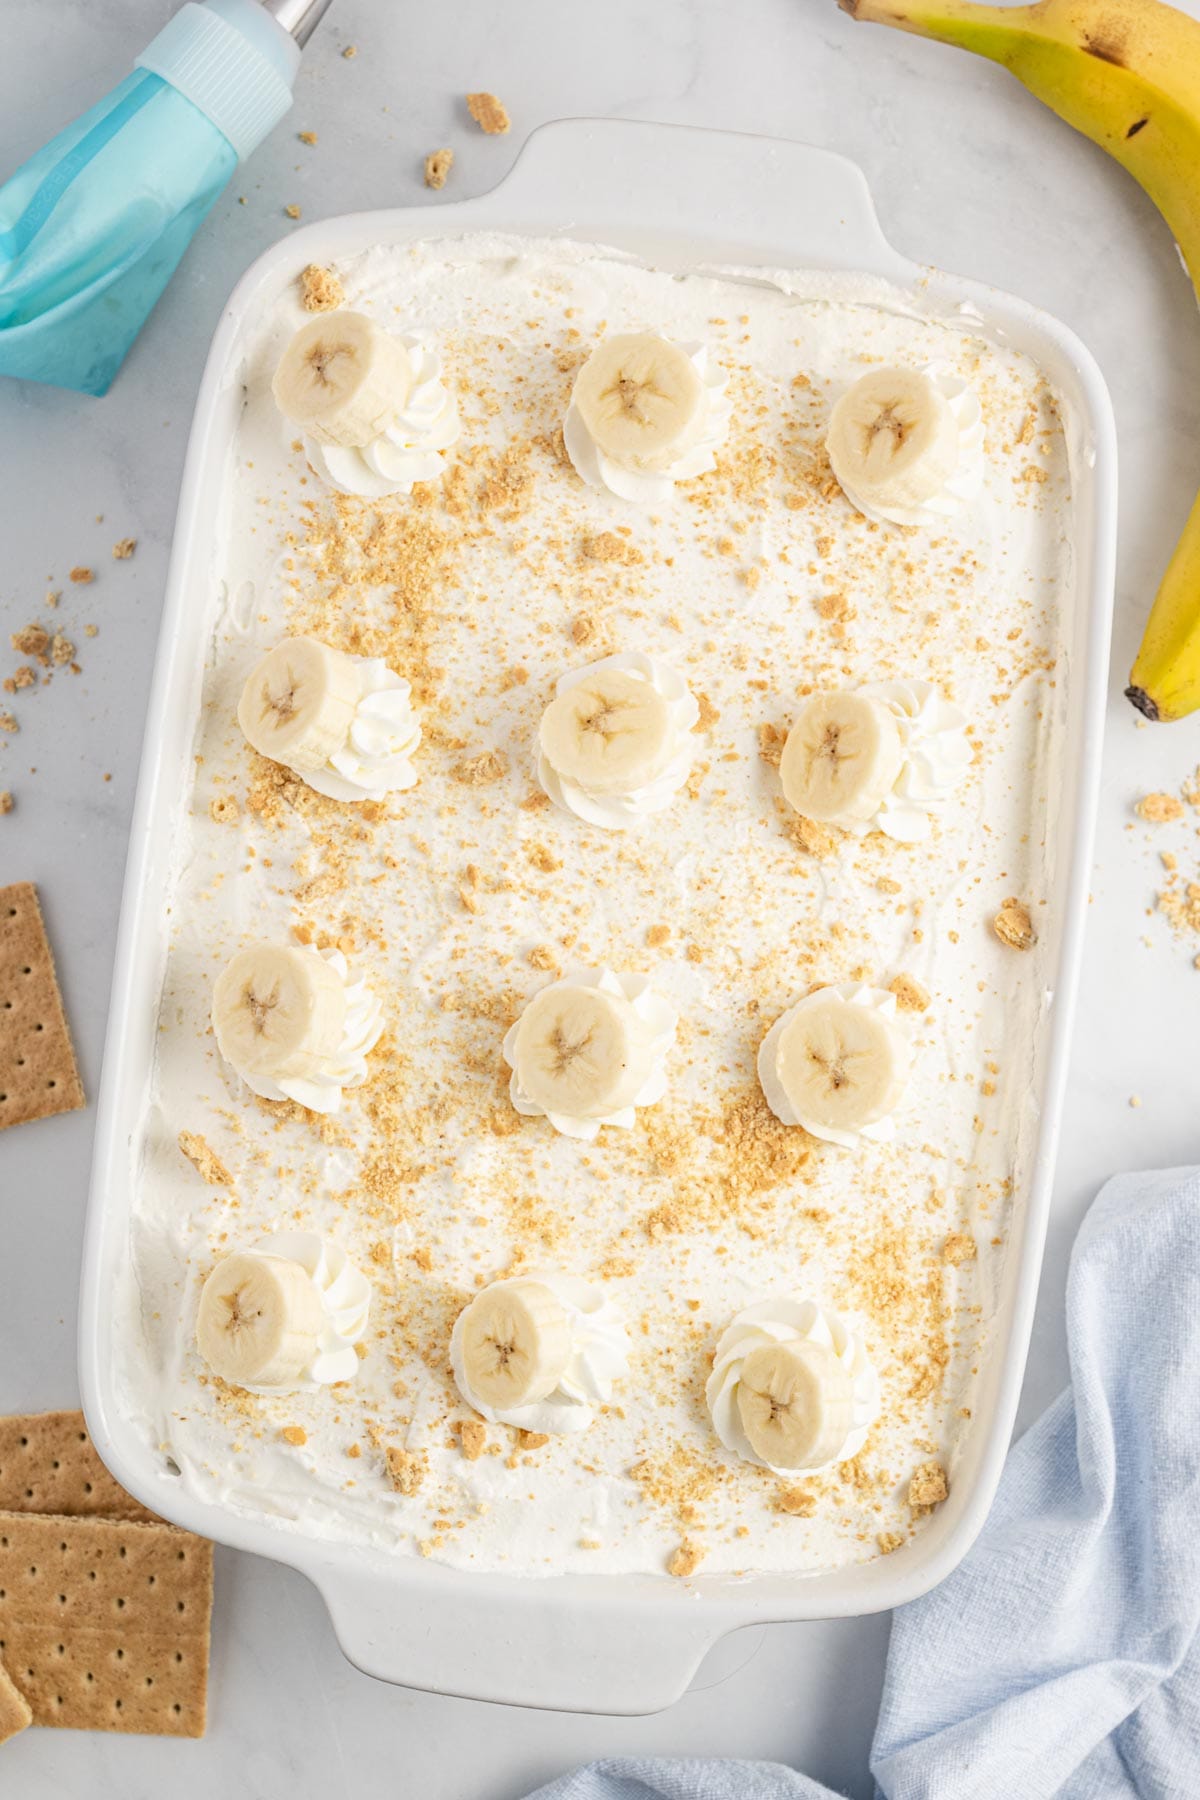 a finished 9x13 banana icebox cake, viewed from above